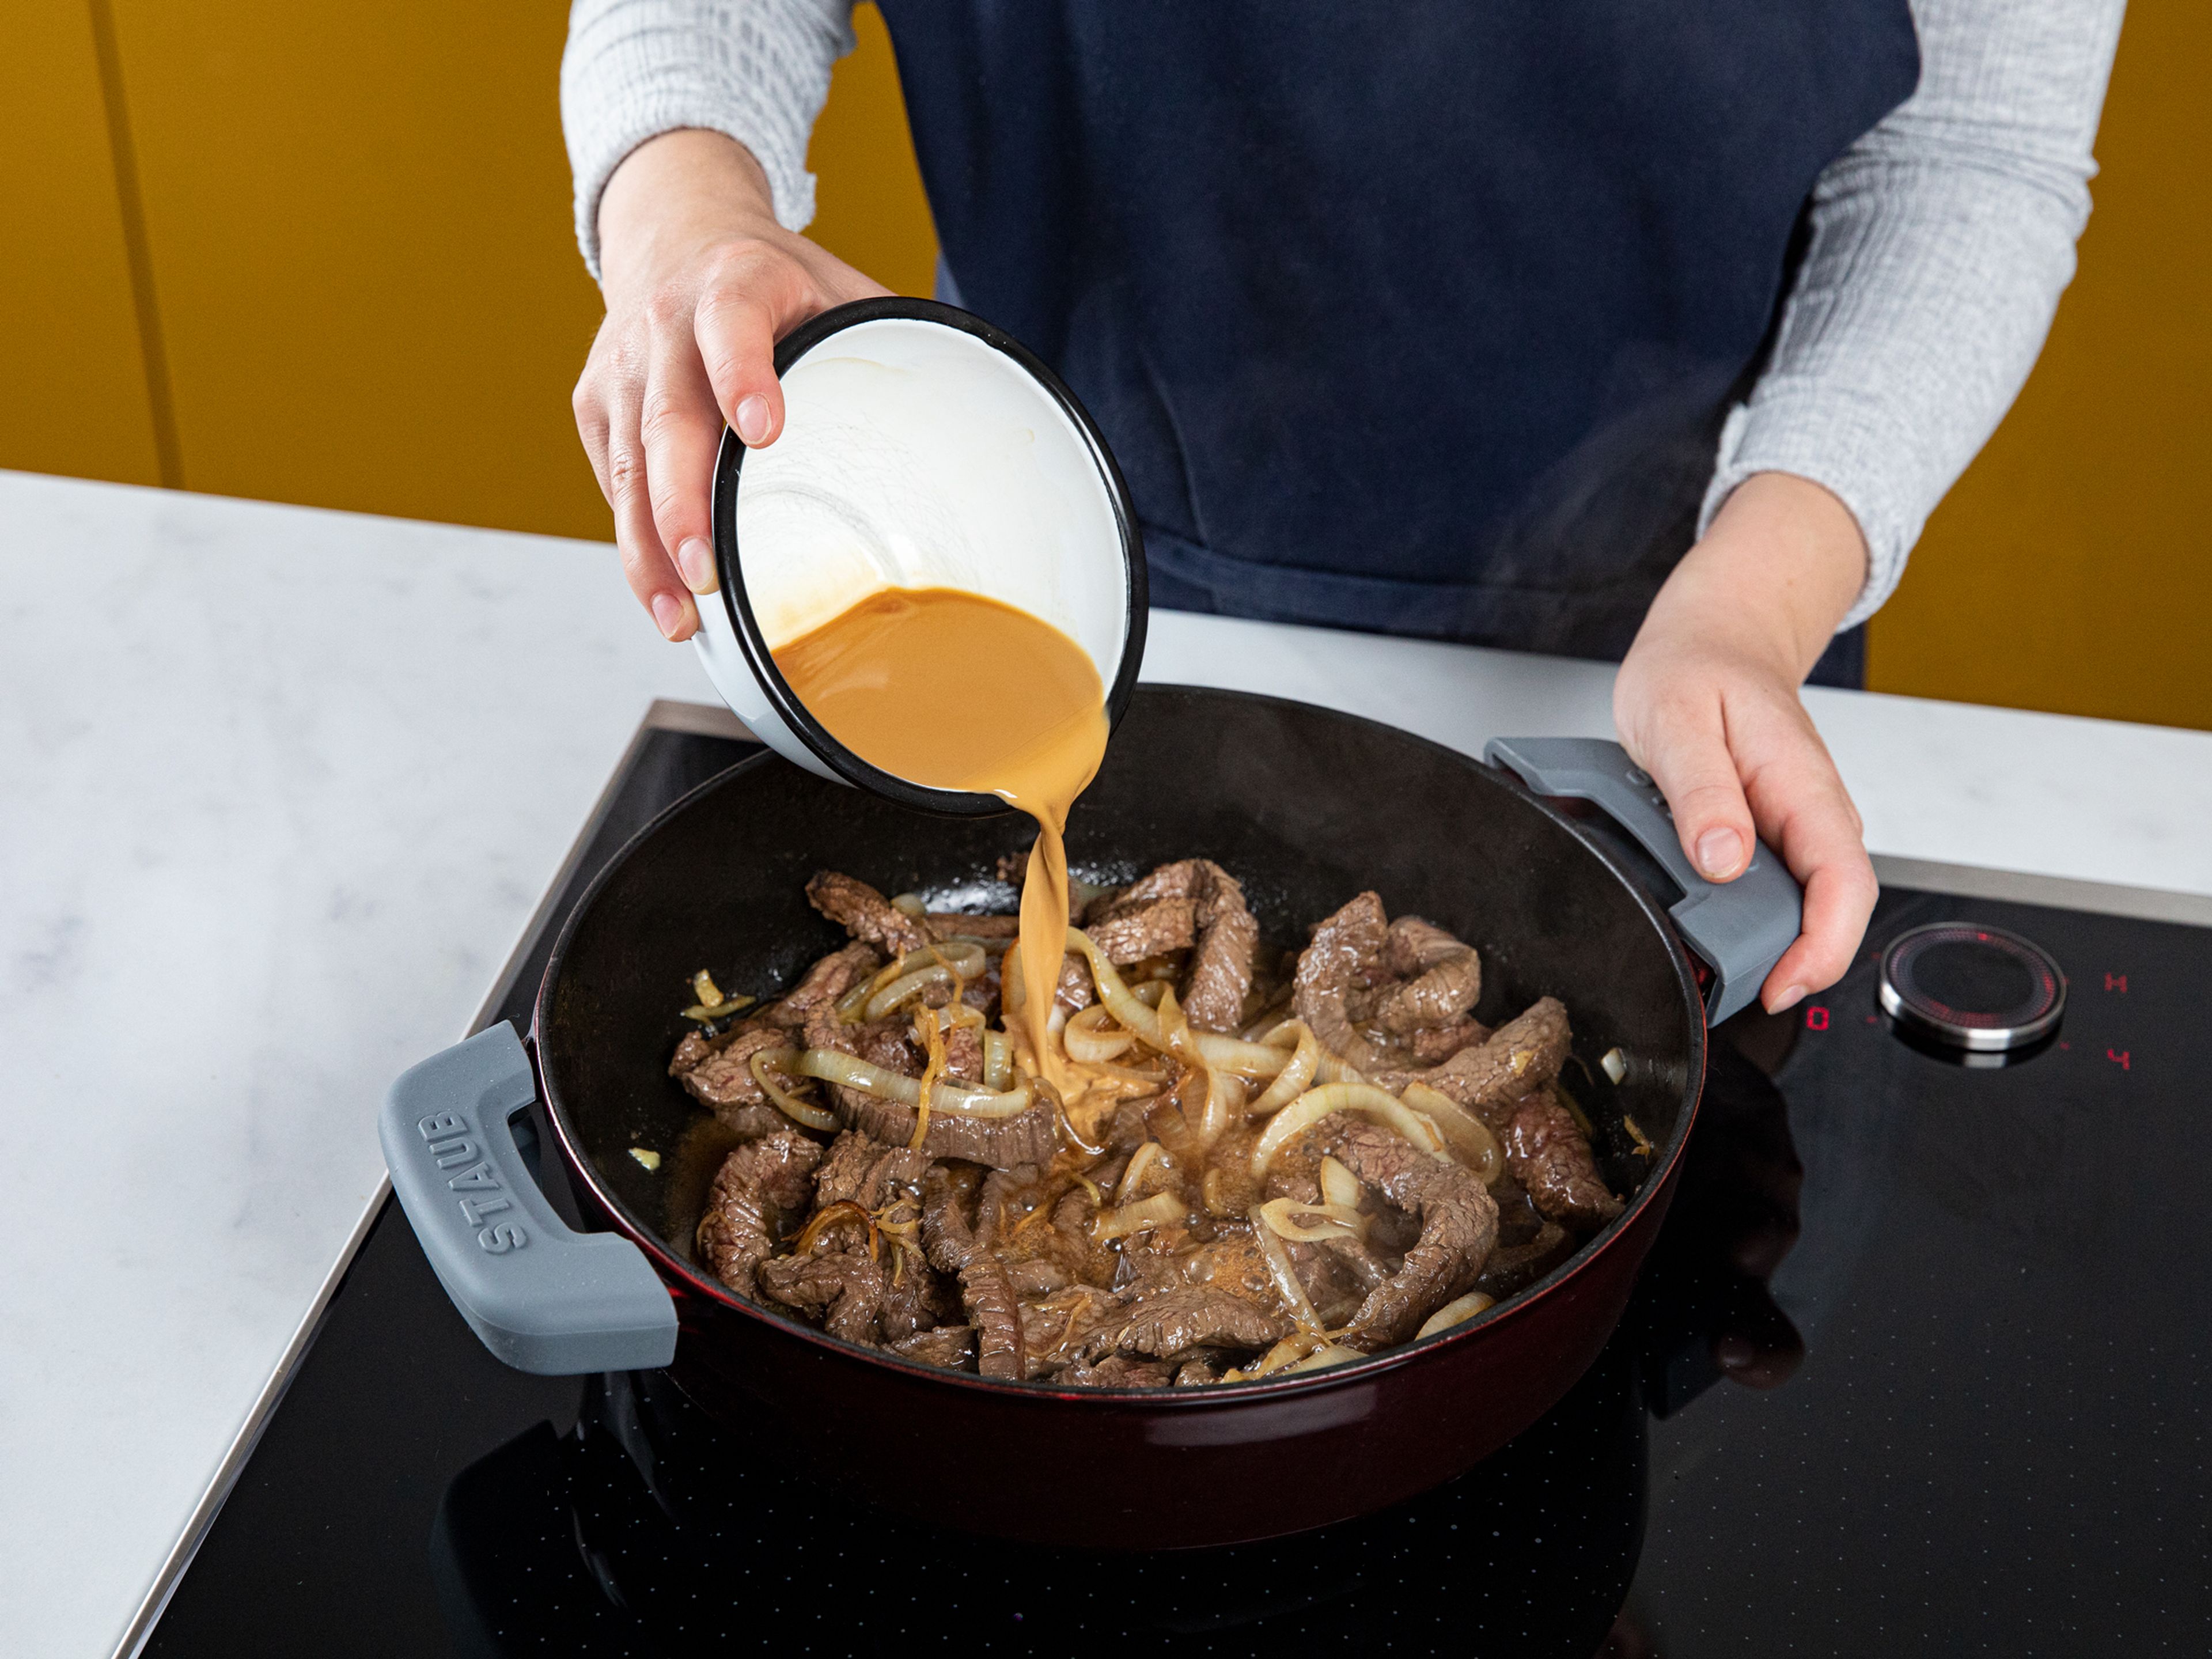 Add soy sauce mixture to the pan and cook until sauce thickens. When the beef is cooked through, remove from heat and stir in butter. Serve with rice and enjoy!